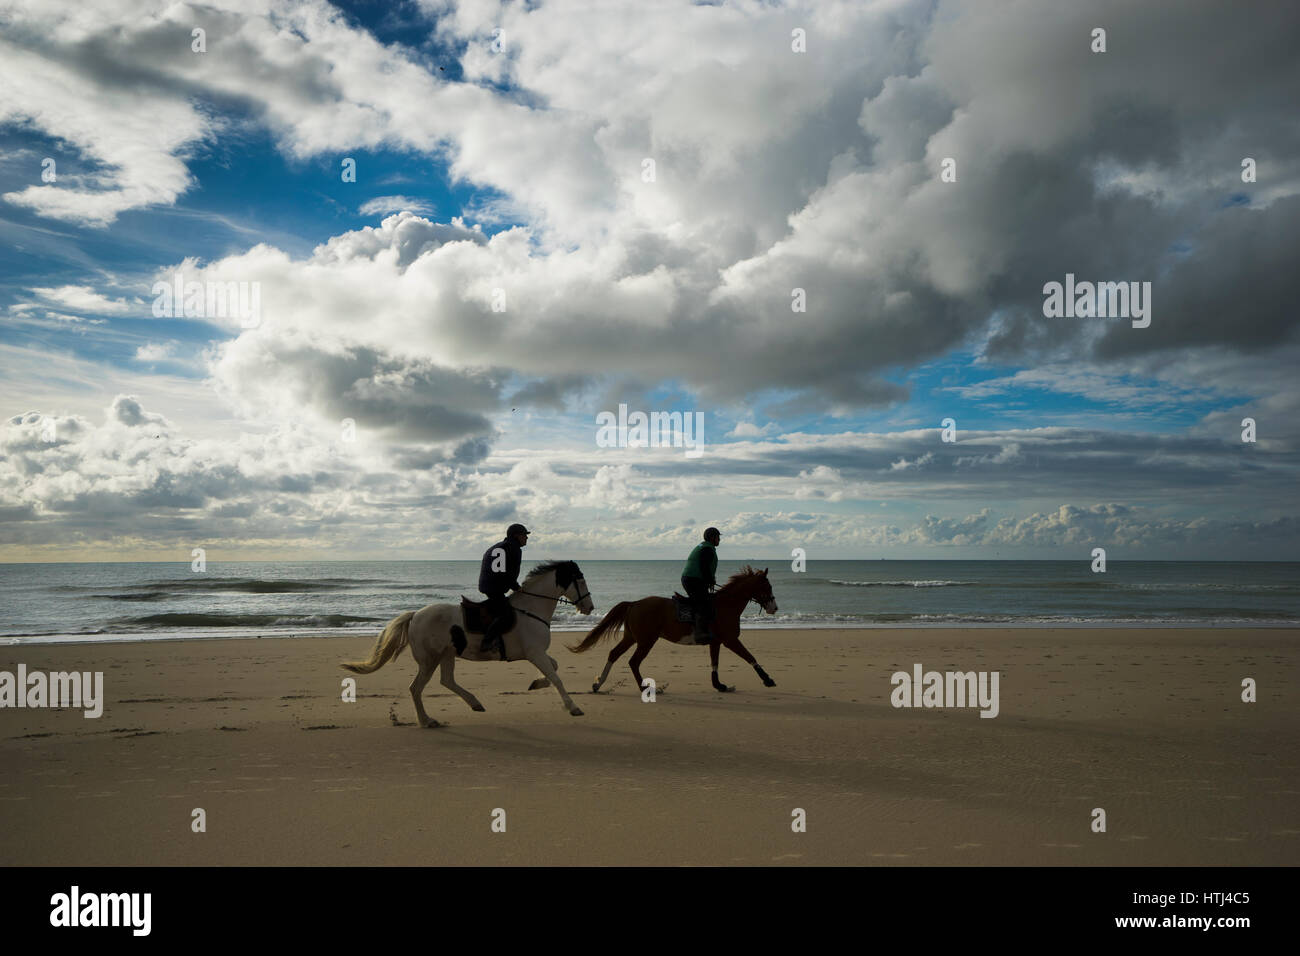 Two beach rider at hardelot beach, Cote d'Opale, France Stock Photo